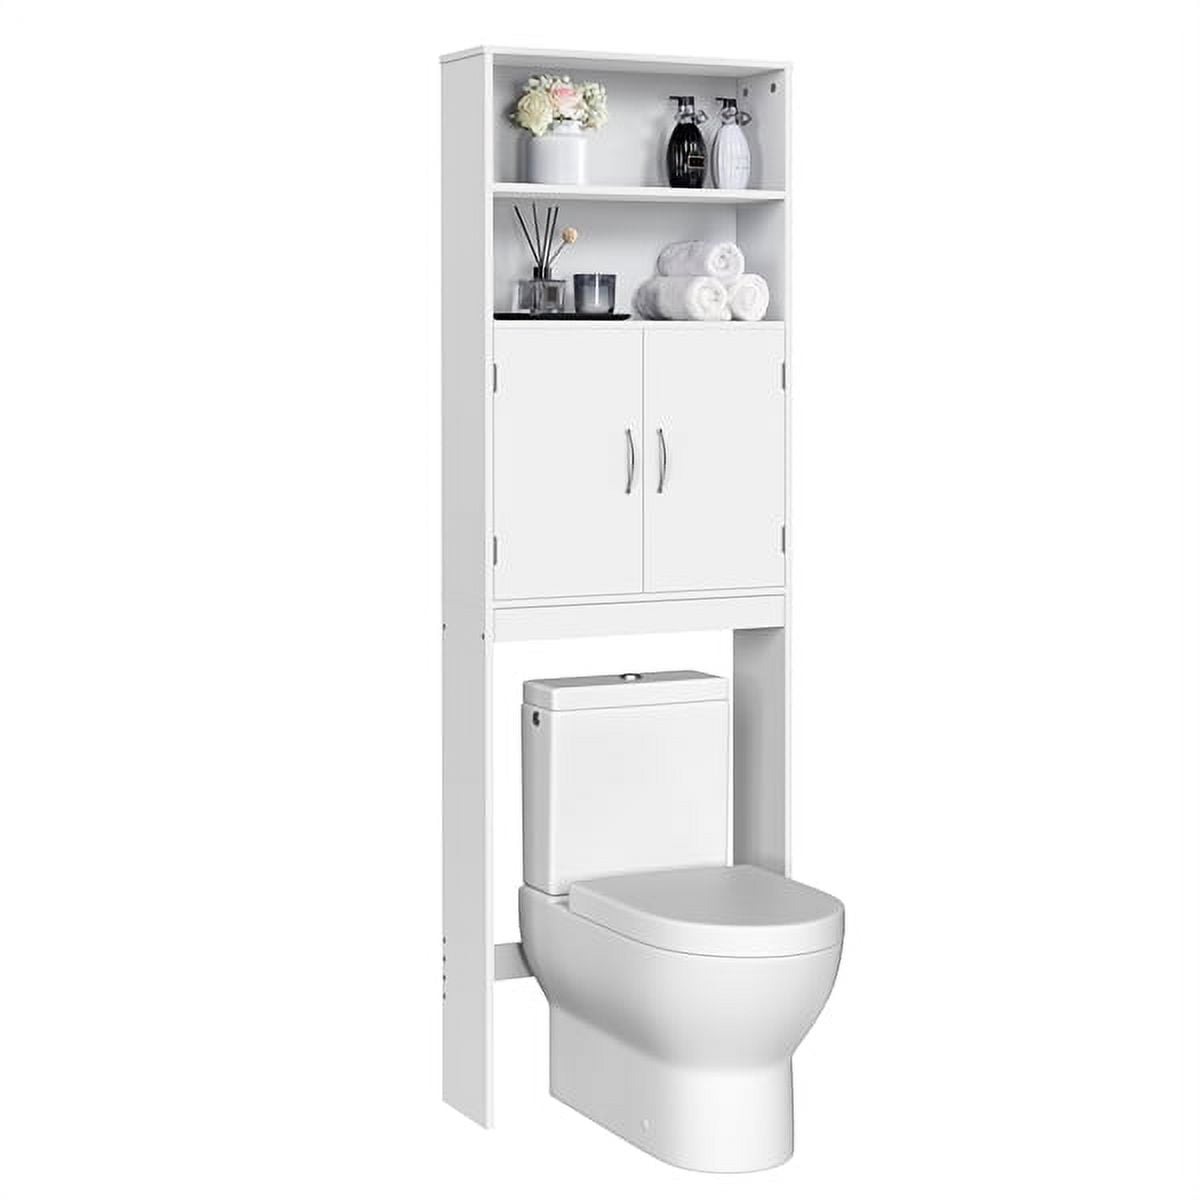 Homeiju Over The Toilet Storage Cabinet with Toilet Paper Holder Stand,  35.5'' Wide Freestanding Bathroom Organizer Space-Saving Toilet Rack for